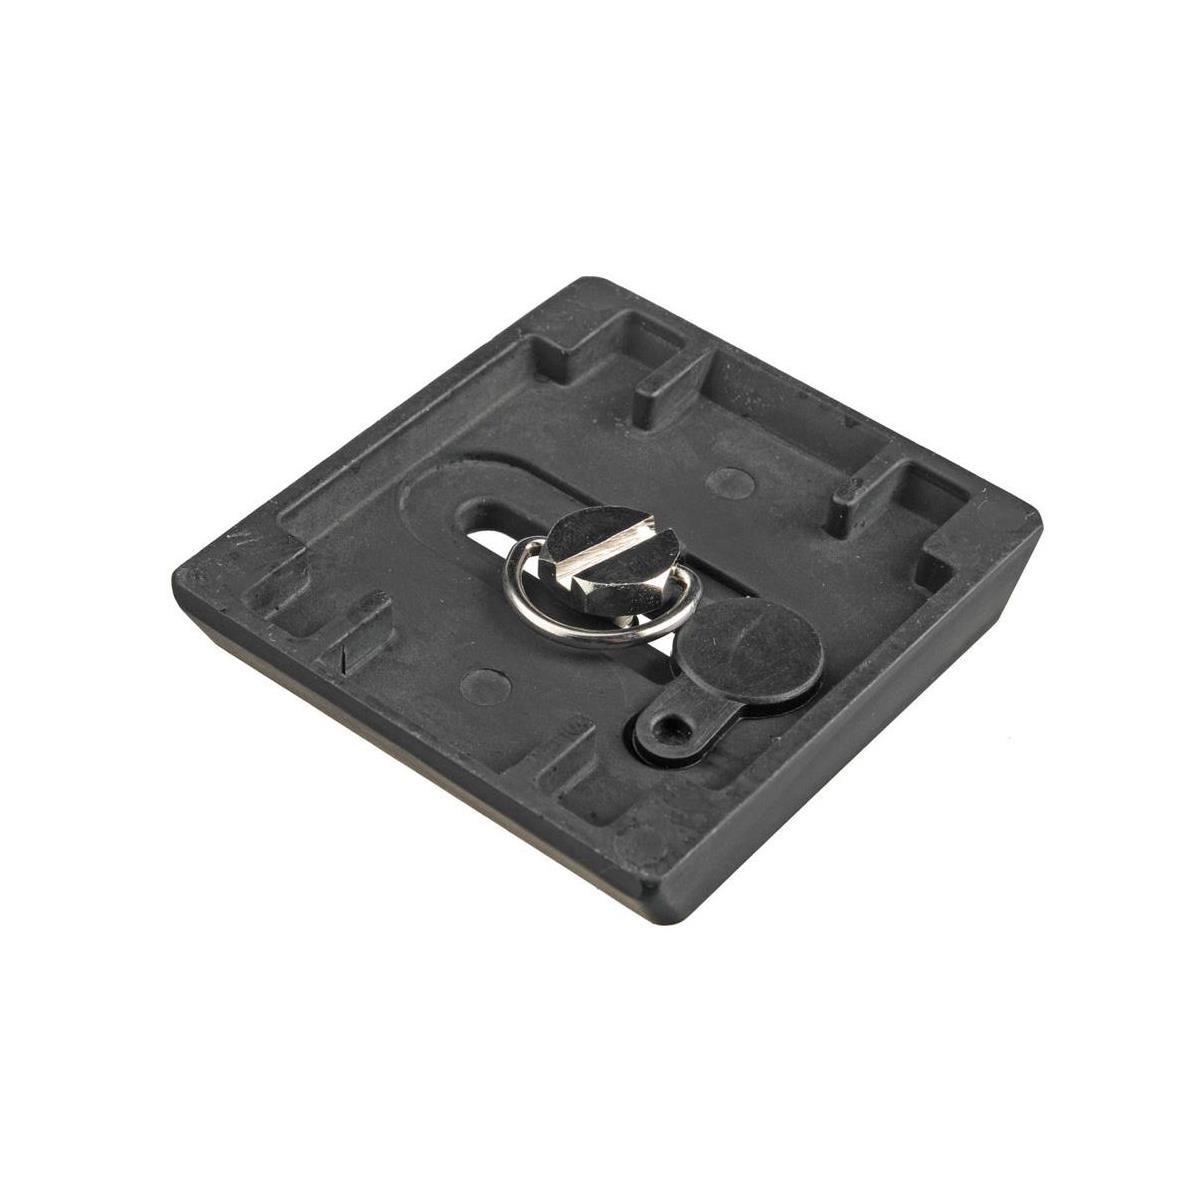 Induro PH10 Quick Release Plate for   BH-2-M Ball Heads and HD-38M Pan Heads